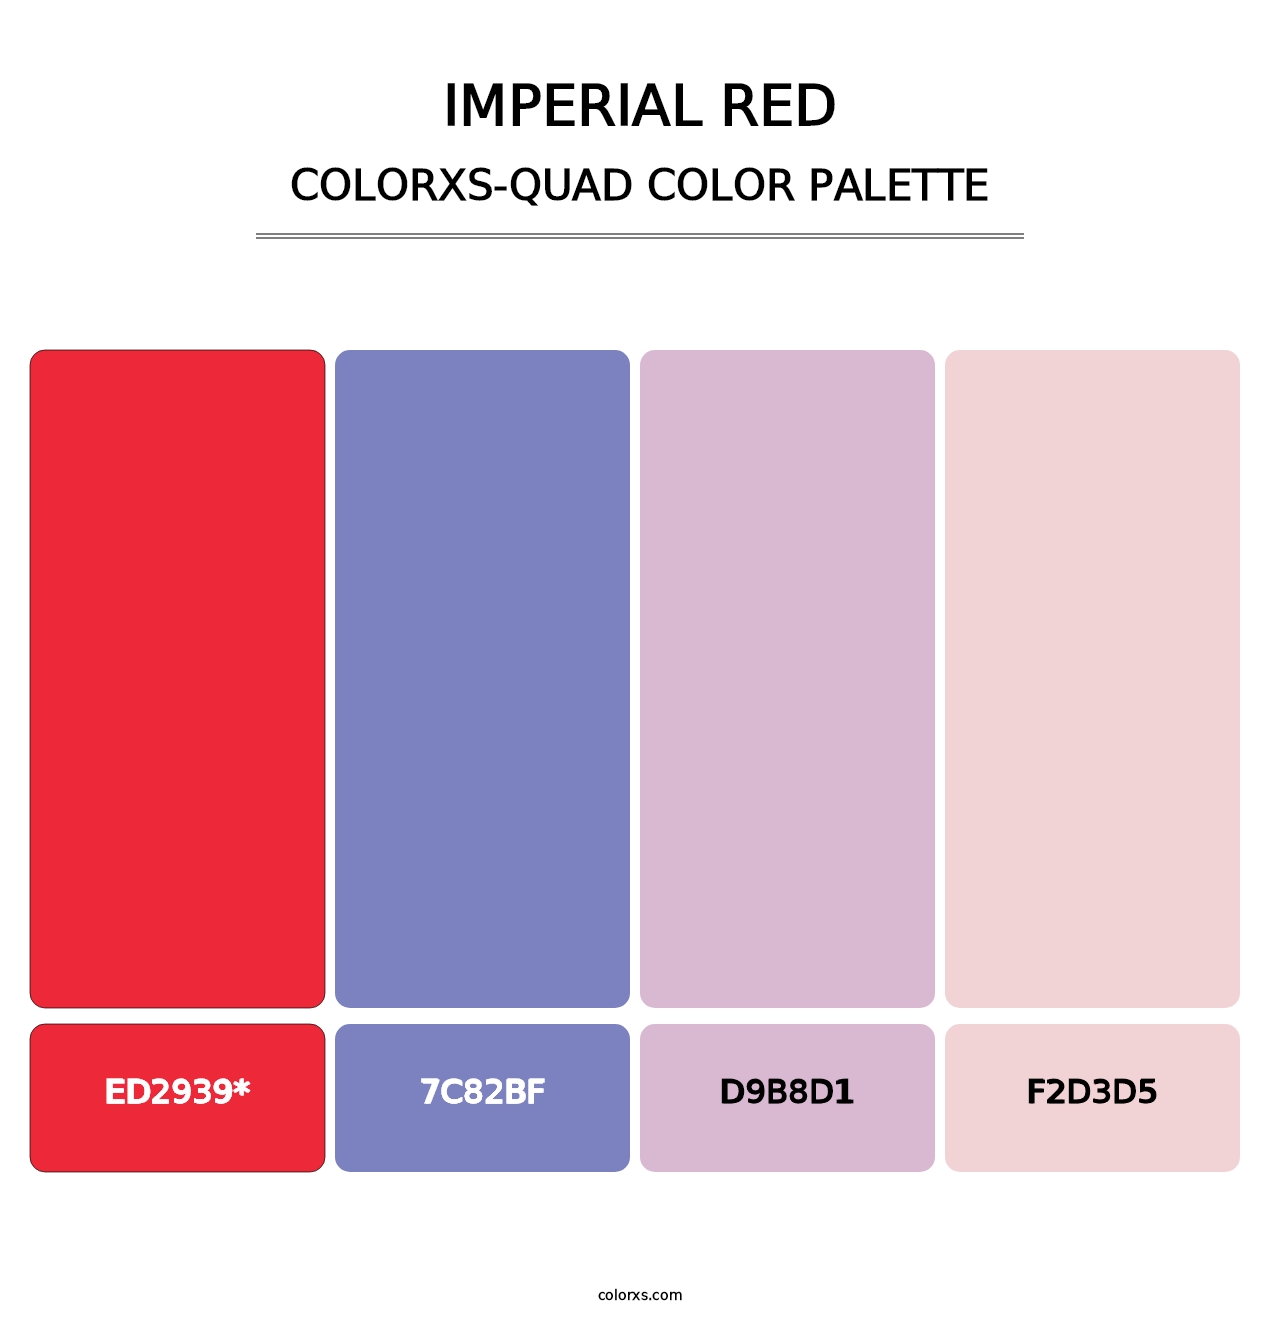 Imperial Red - Colorxs Quad Palette